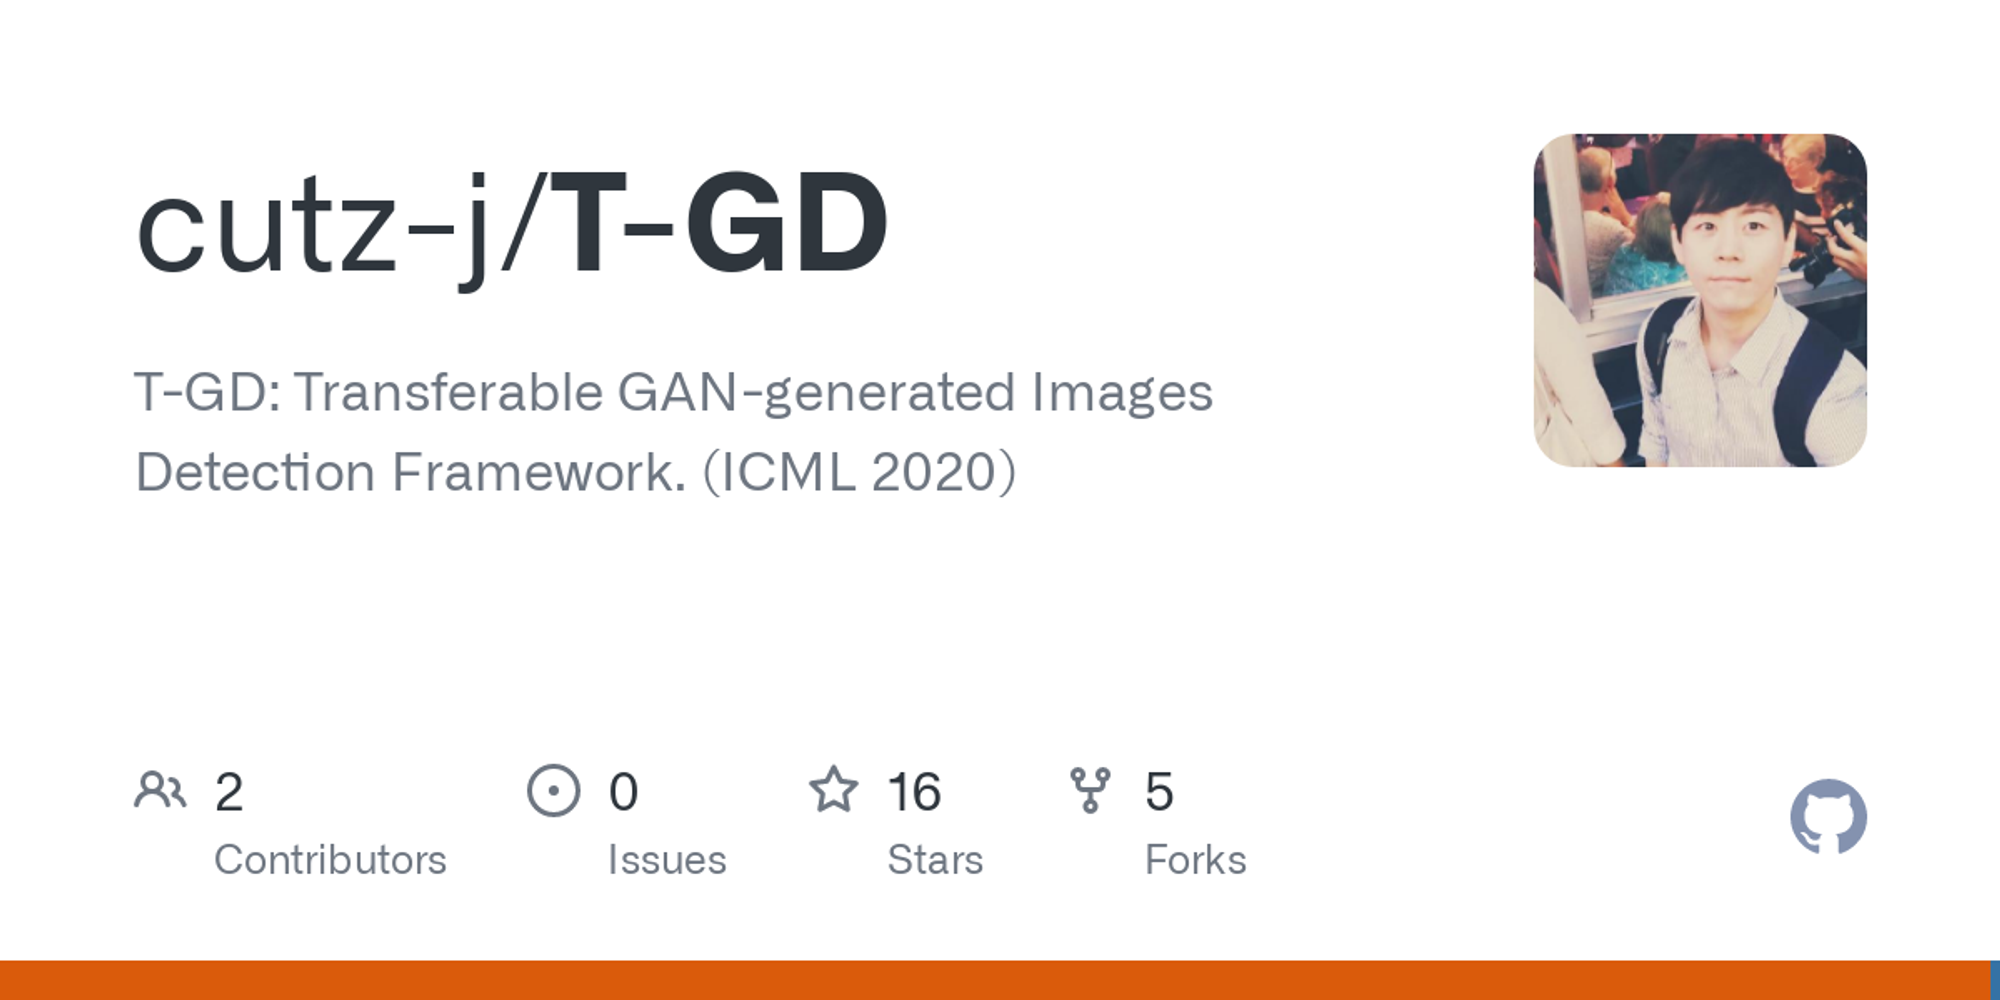 GitHub - cutz-j/T-GD: T-GD: Transferable GAN-generated Images Detection Framework. (ICML 2020)